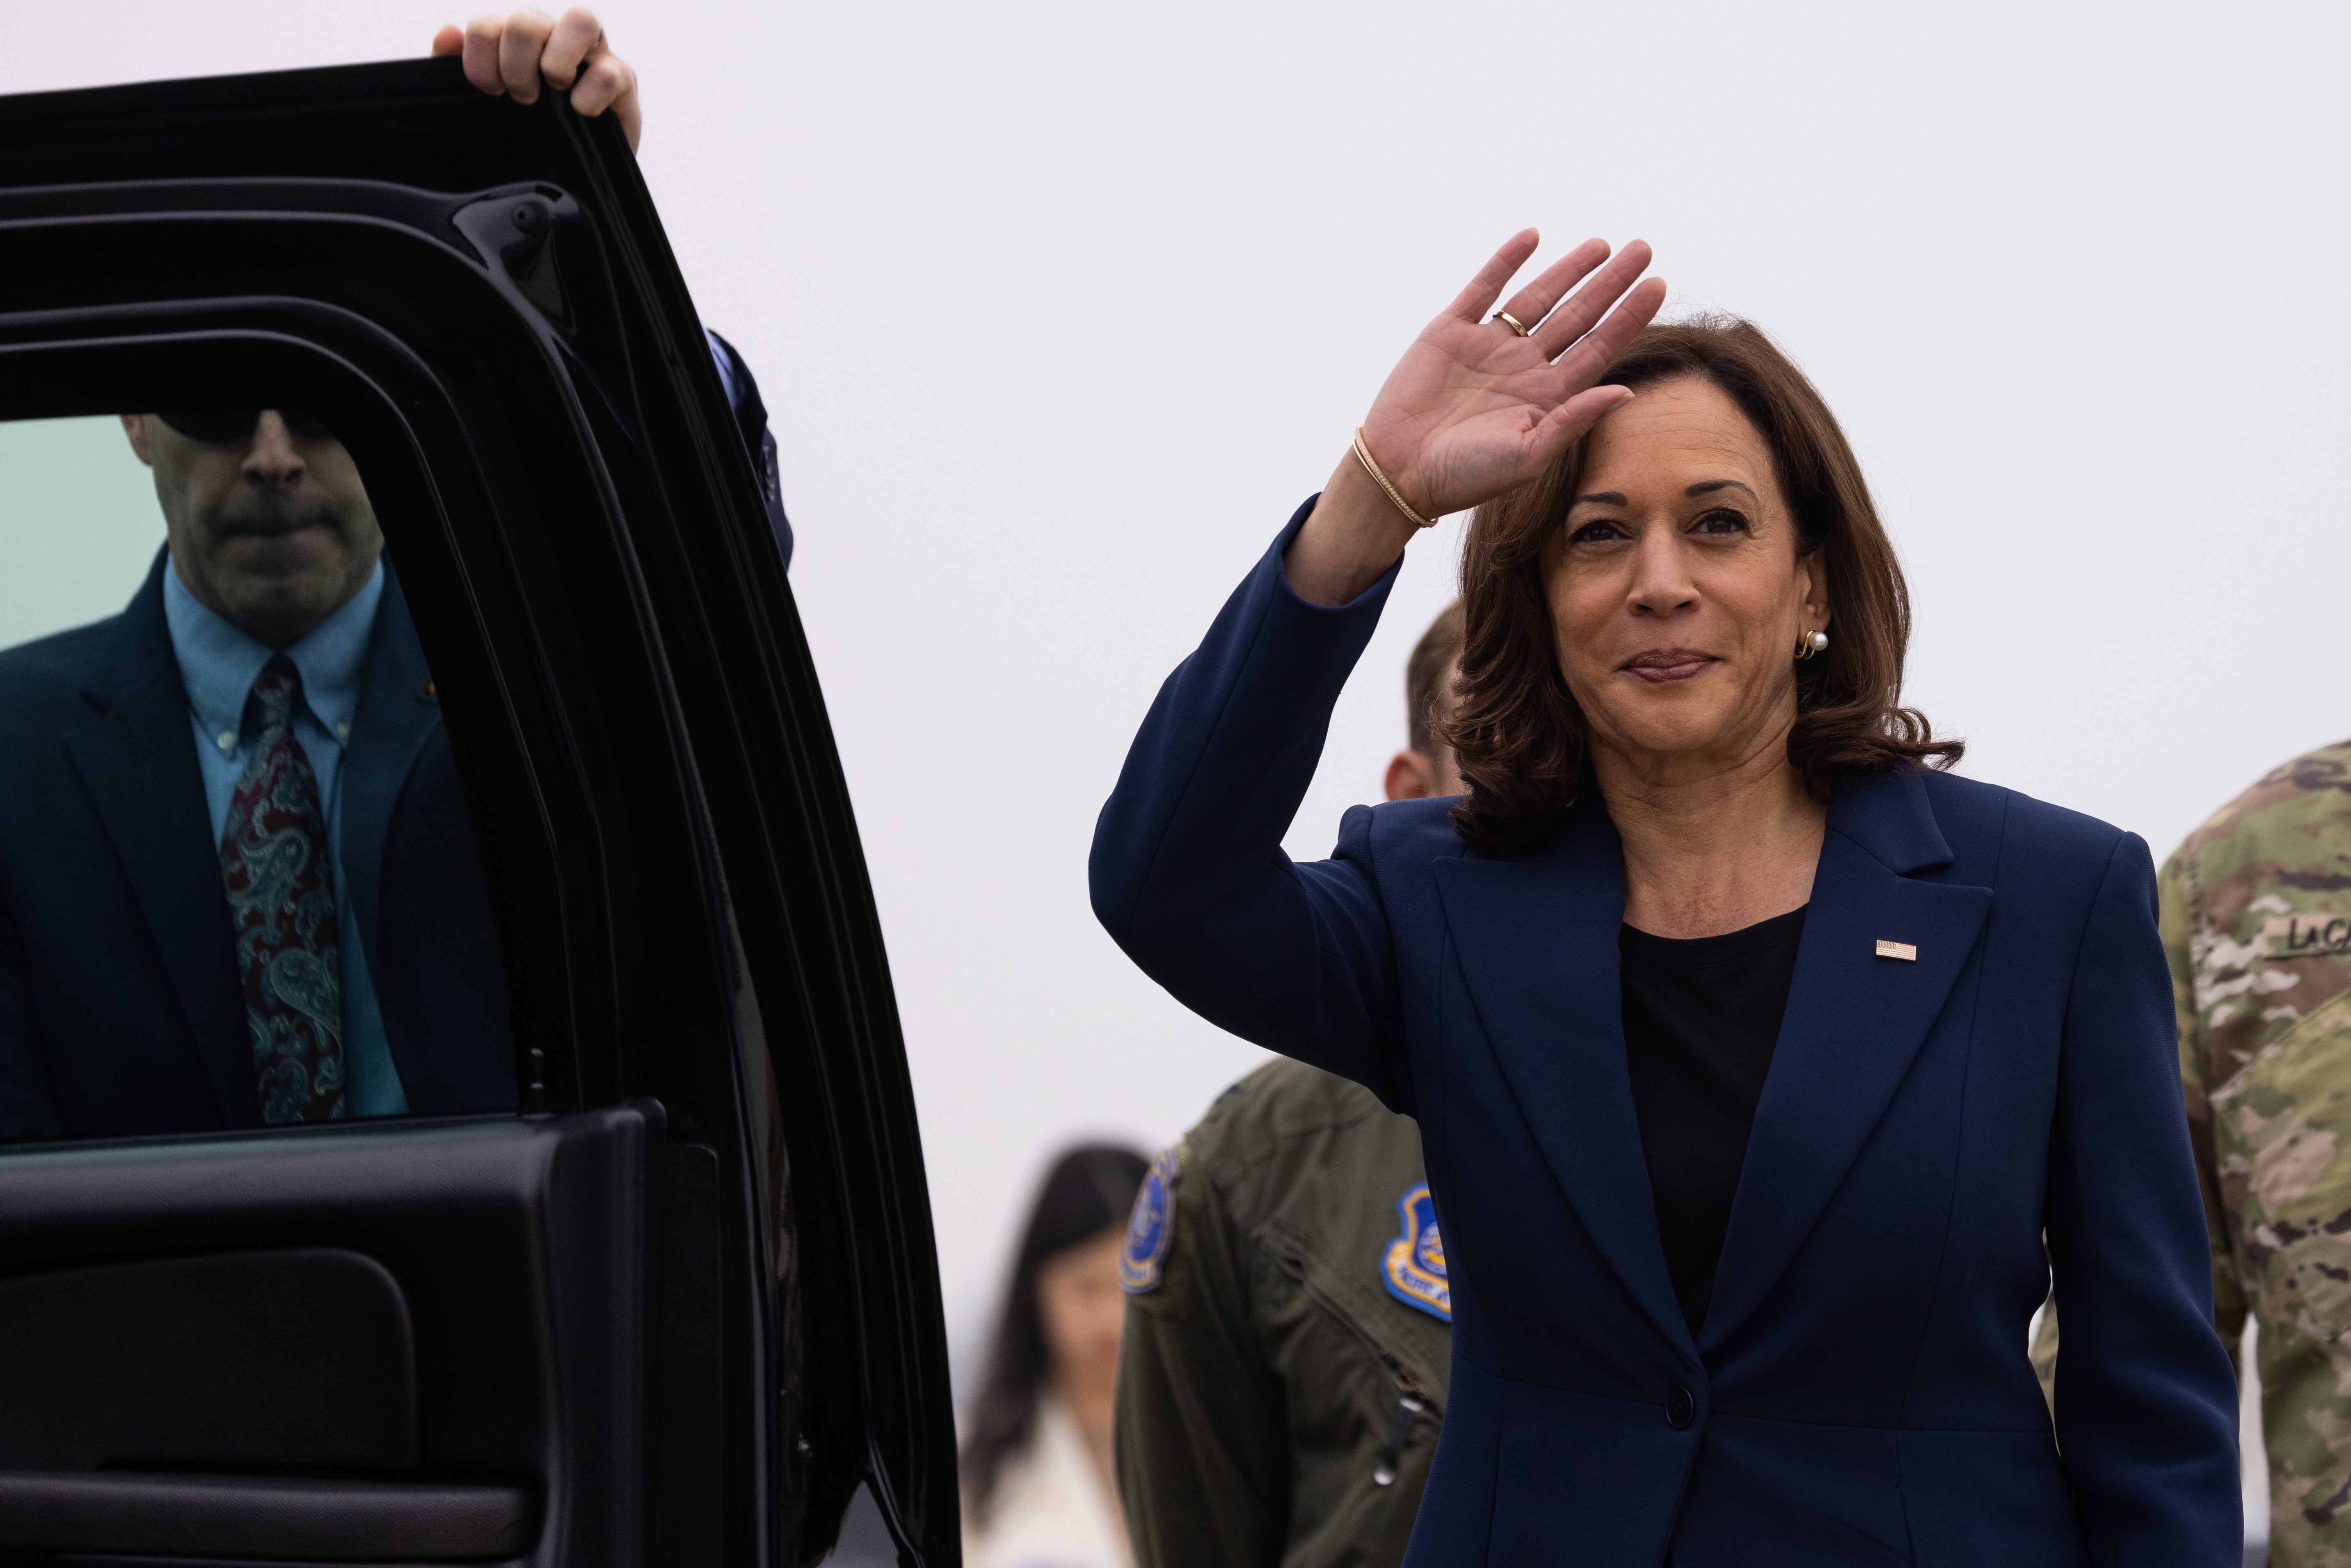 Kamala Harris heads to Texas for dinner with mega-donors, but should she visit the border too?